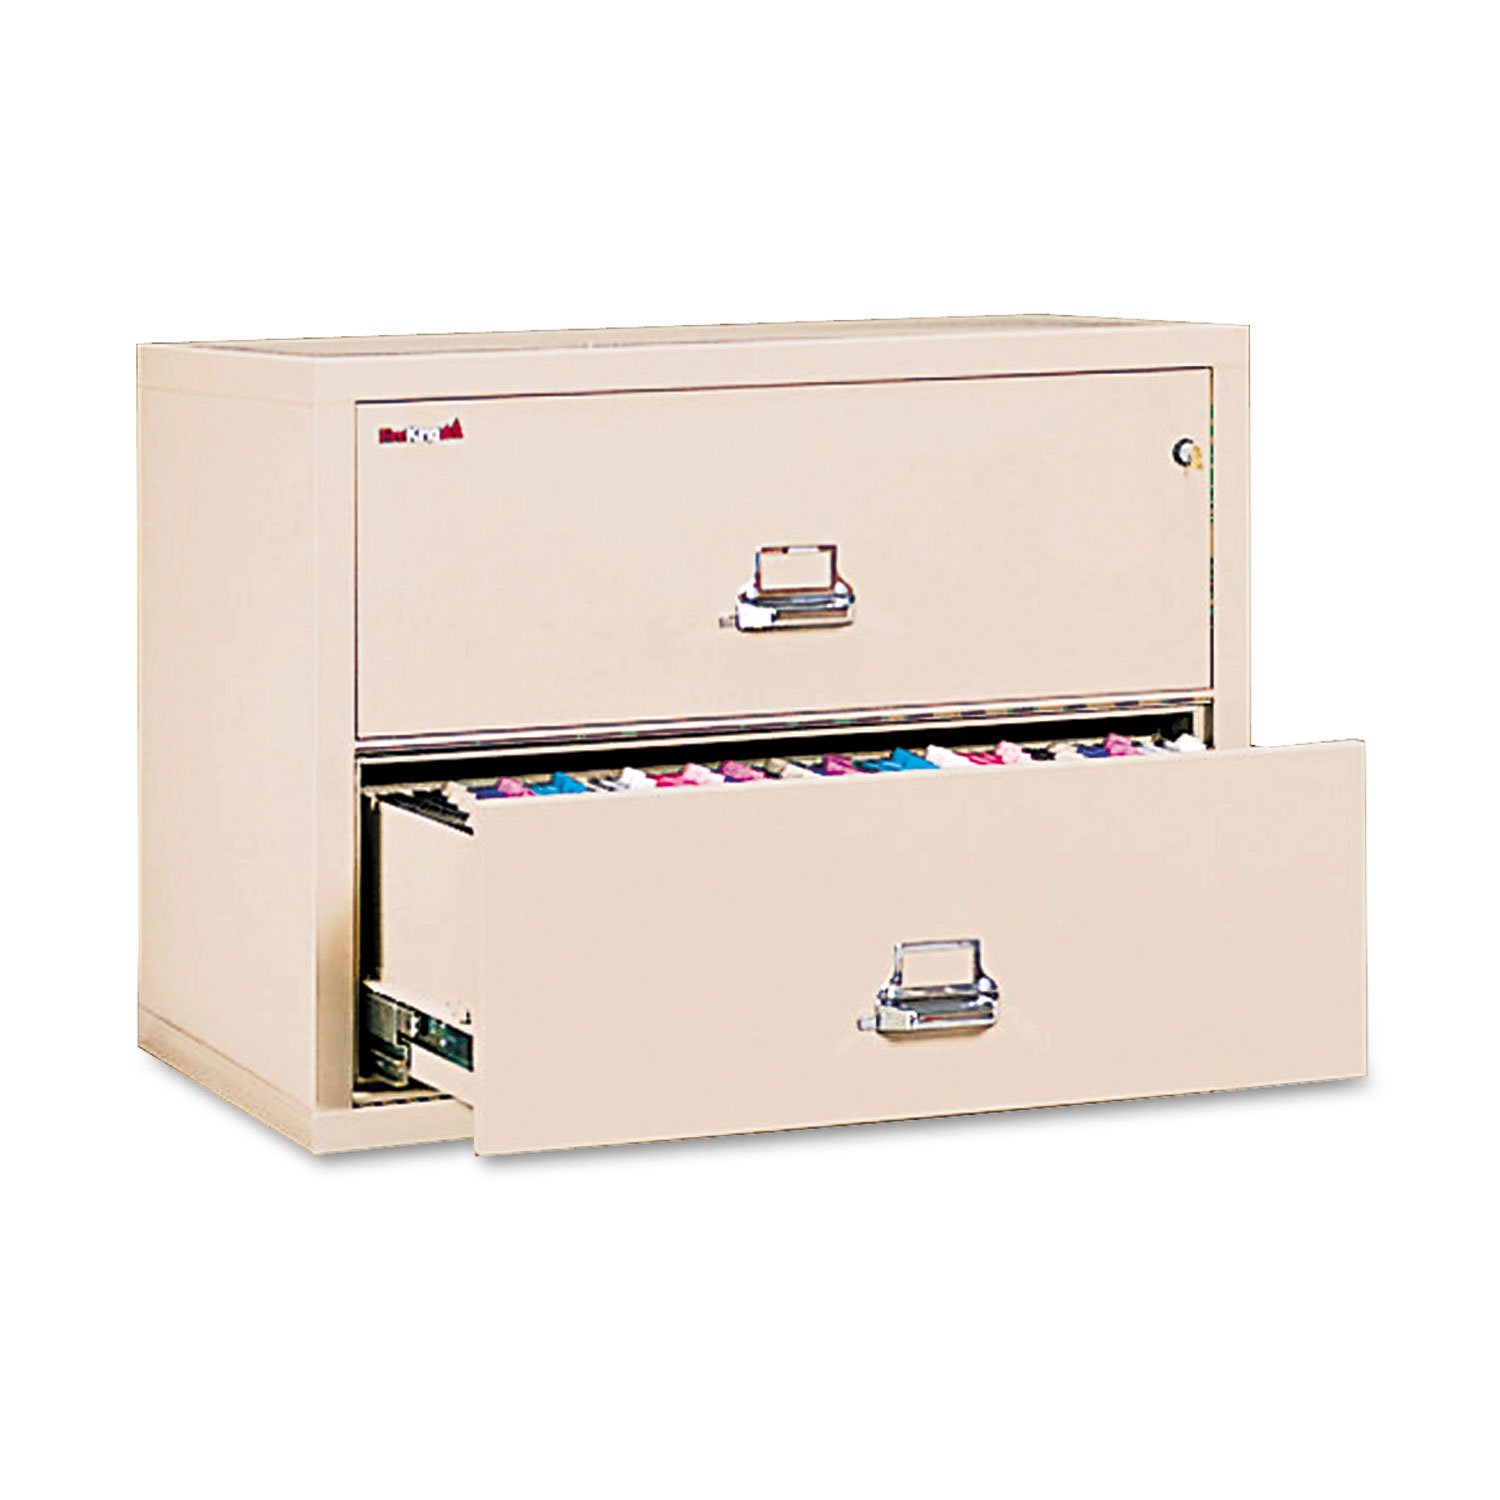 Two-Drawer Lateral File, 37-1/2w x 22-1/8d, UL Listed 350°, Ltr/Legal, Parchment